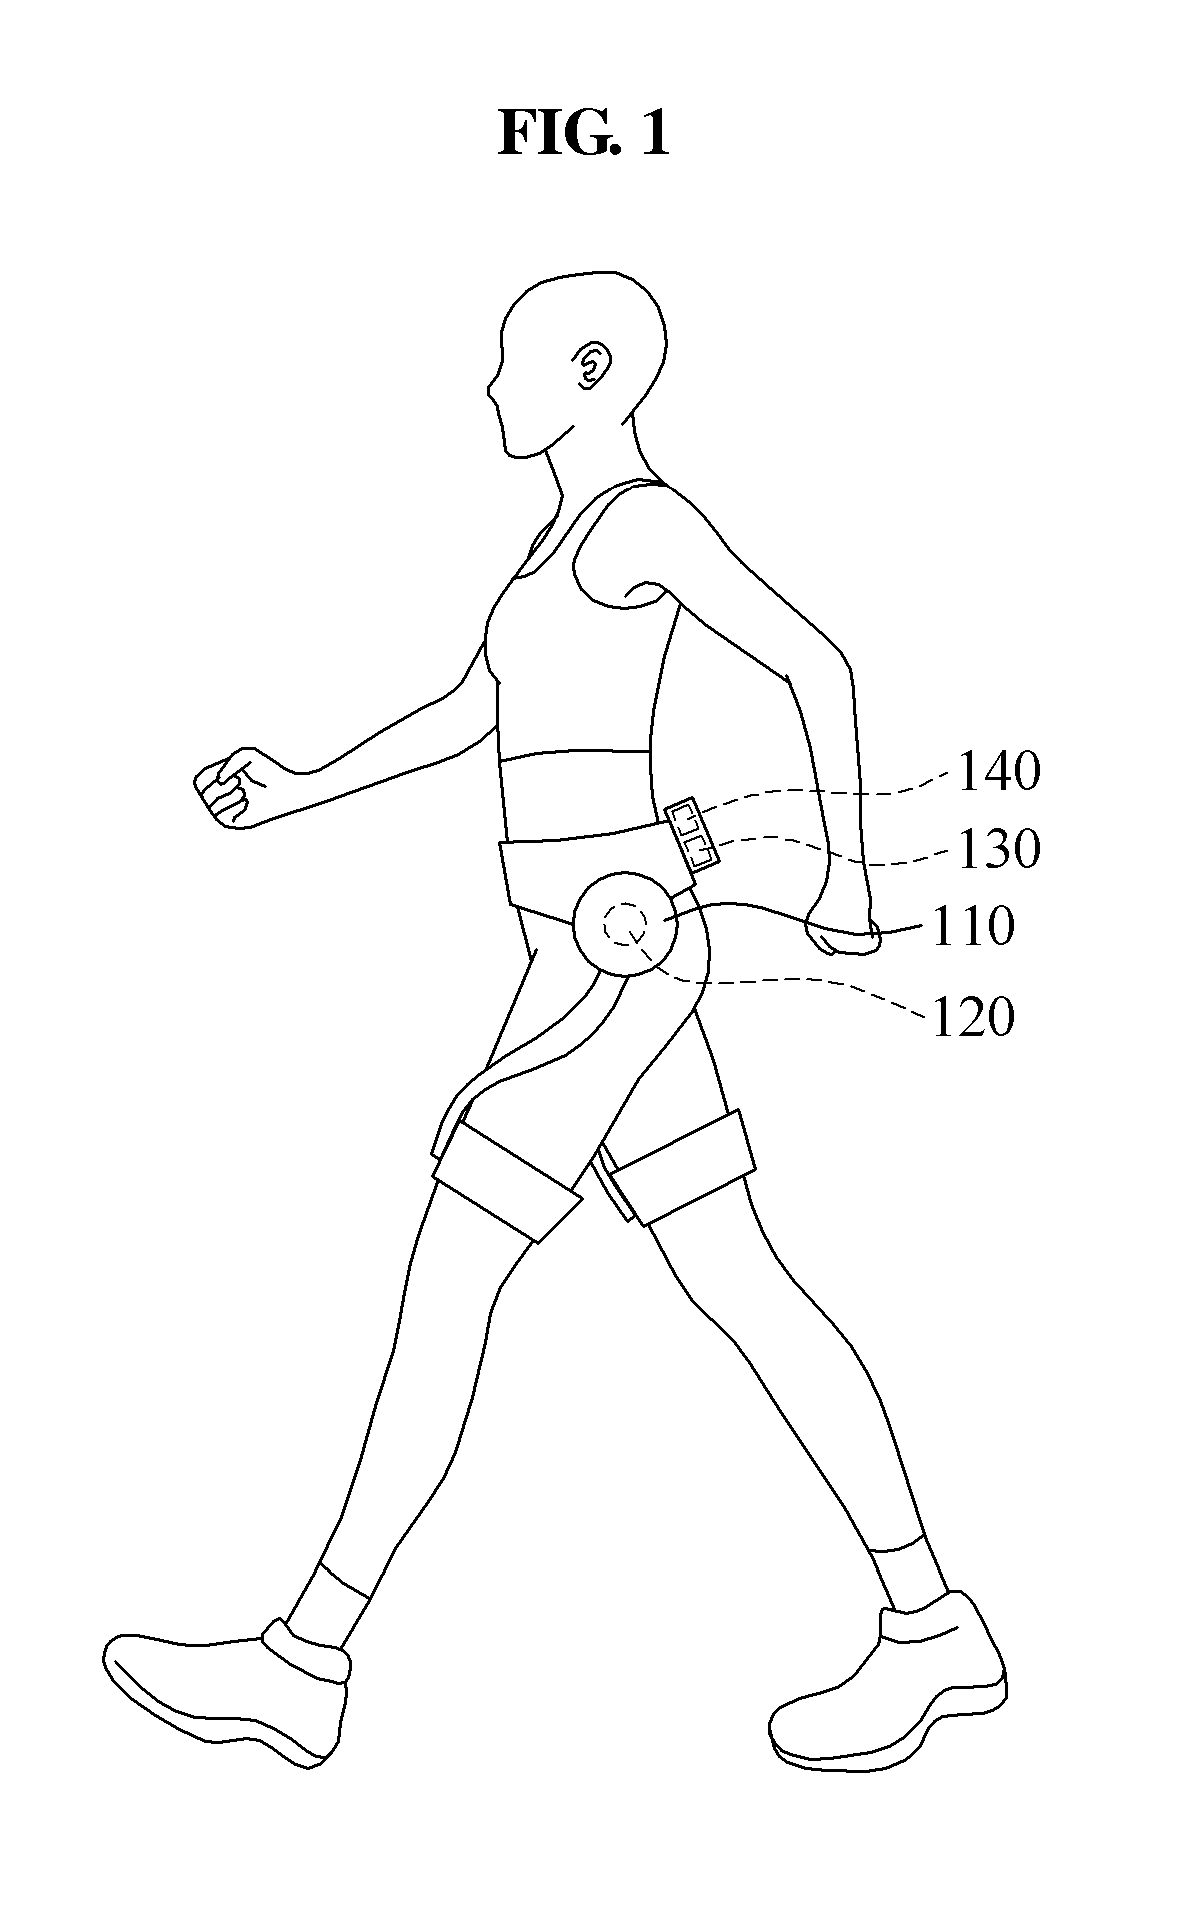 Method and apparatus for recognizing gait motion